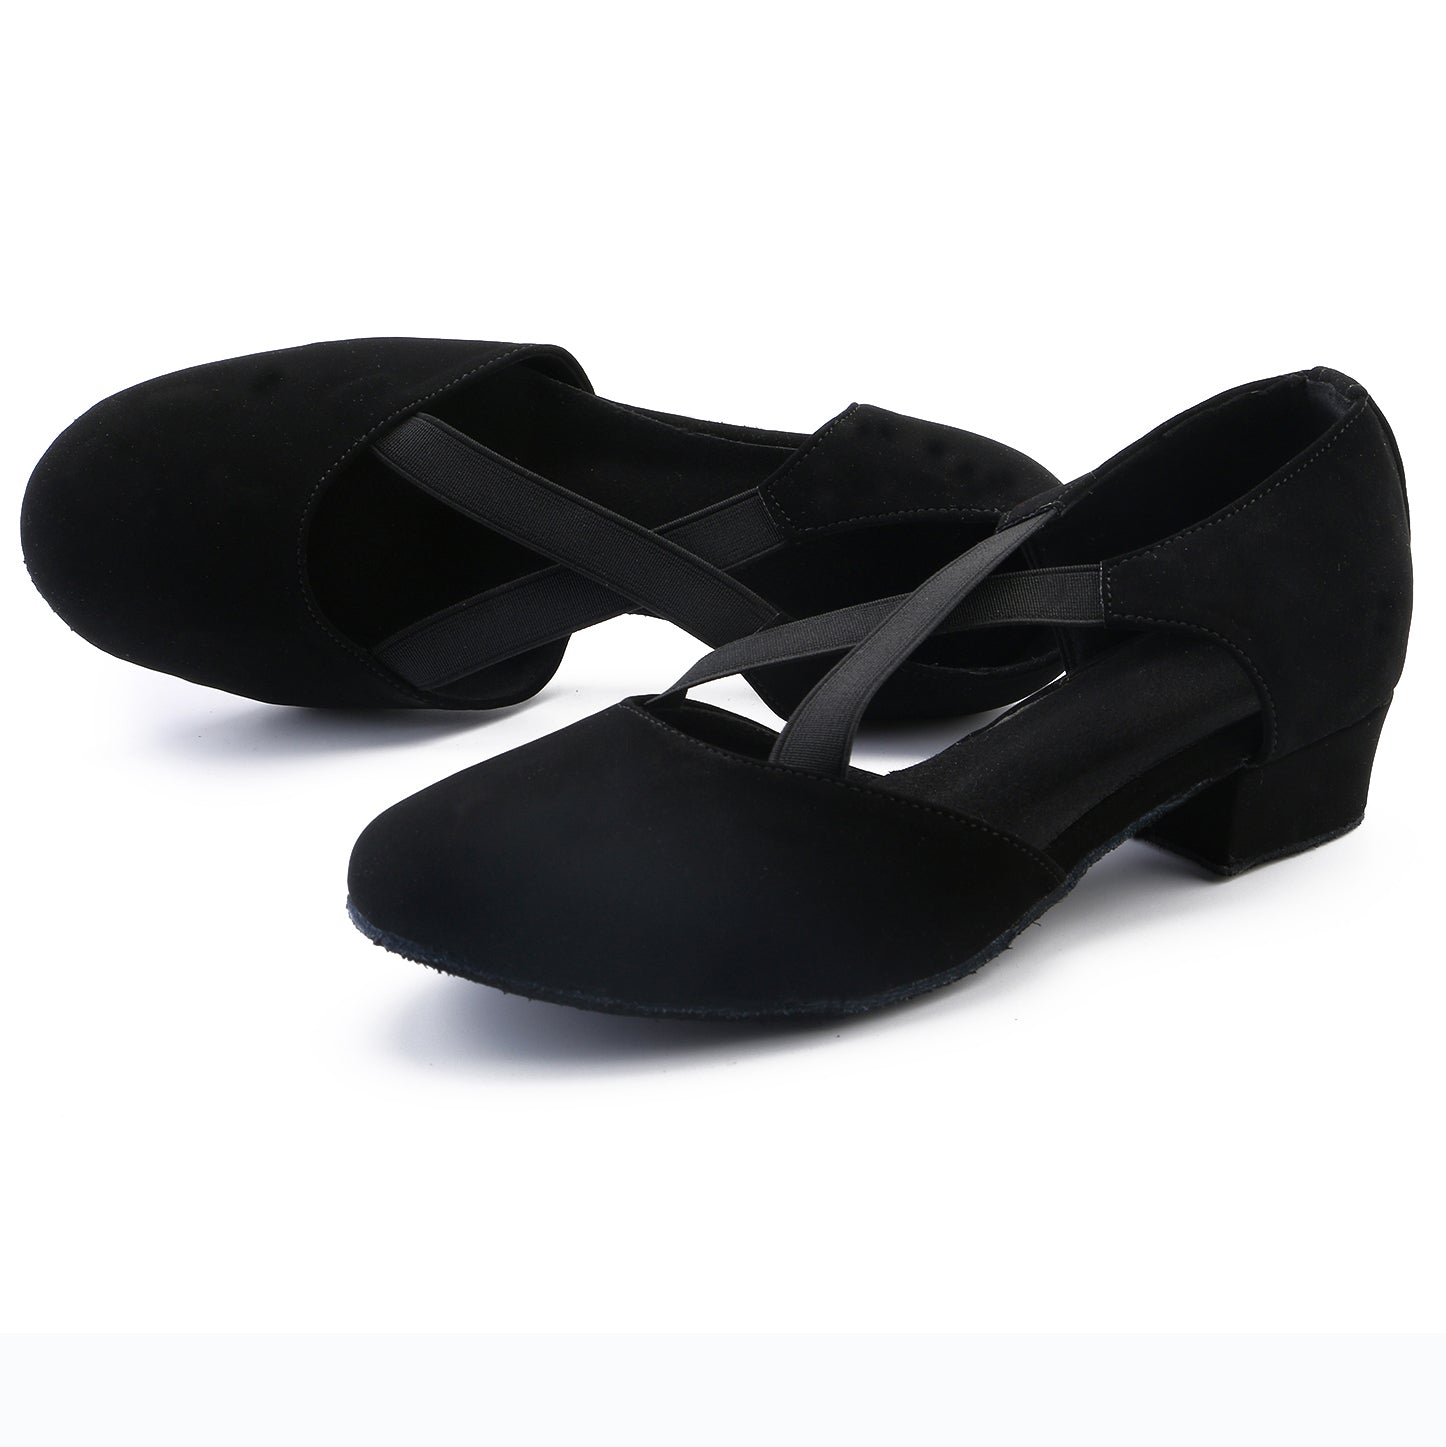 Ladies black low heel ballroom dancing shoes with suede sole for tango latin practice, closed-toe design (PD7307B)0